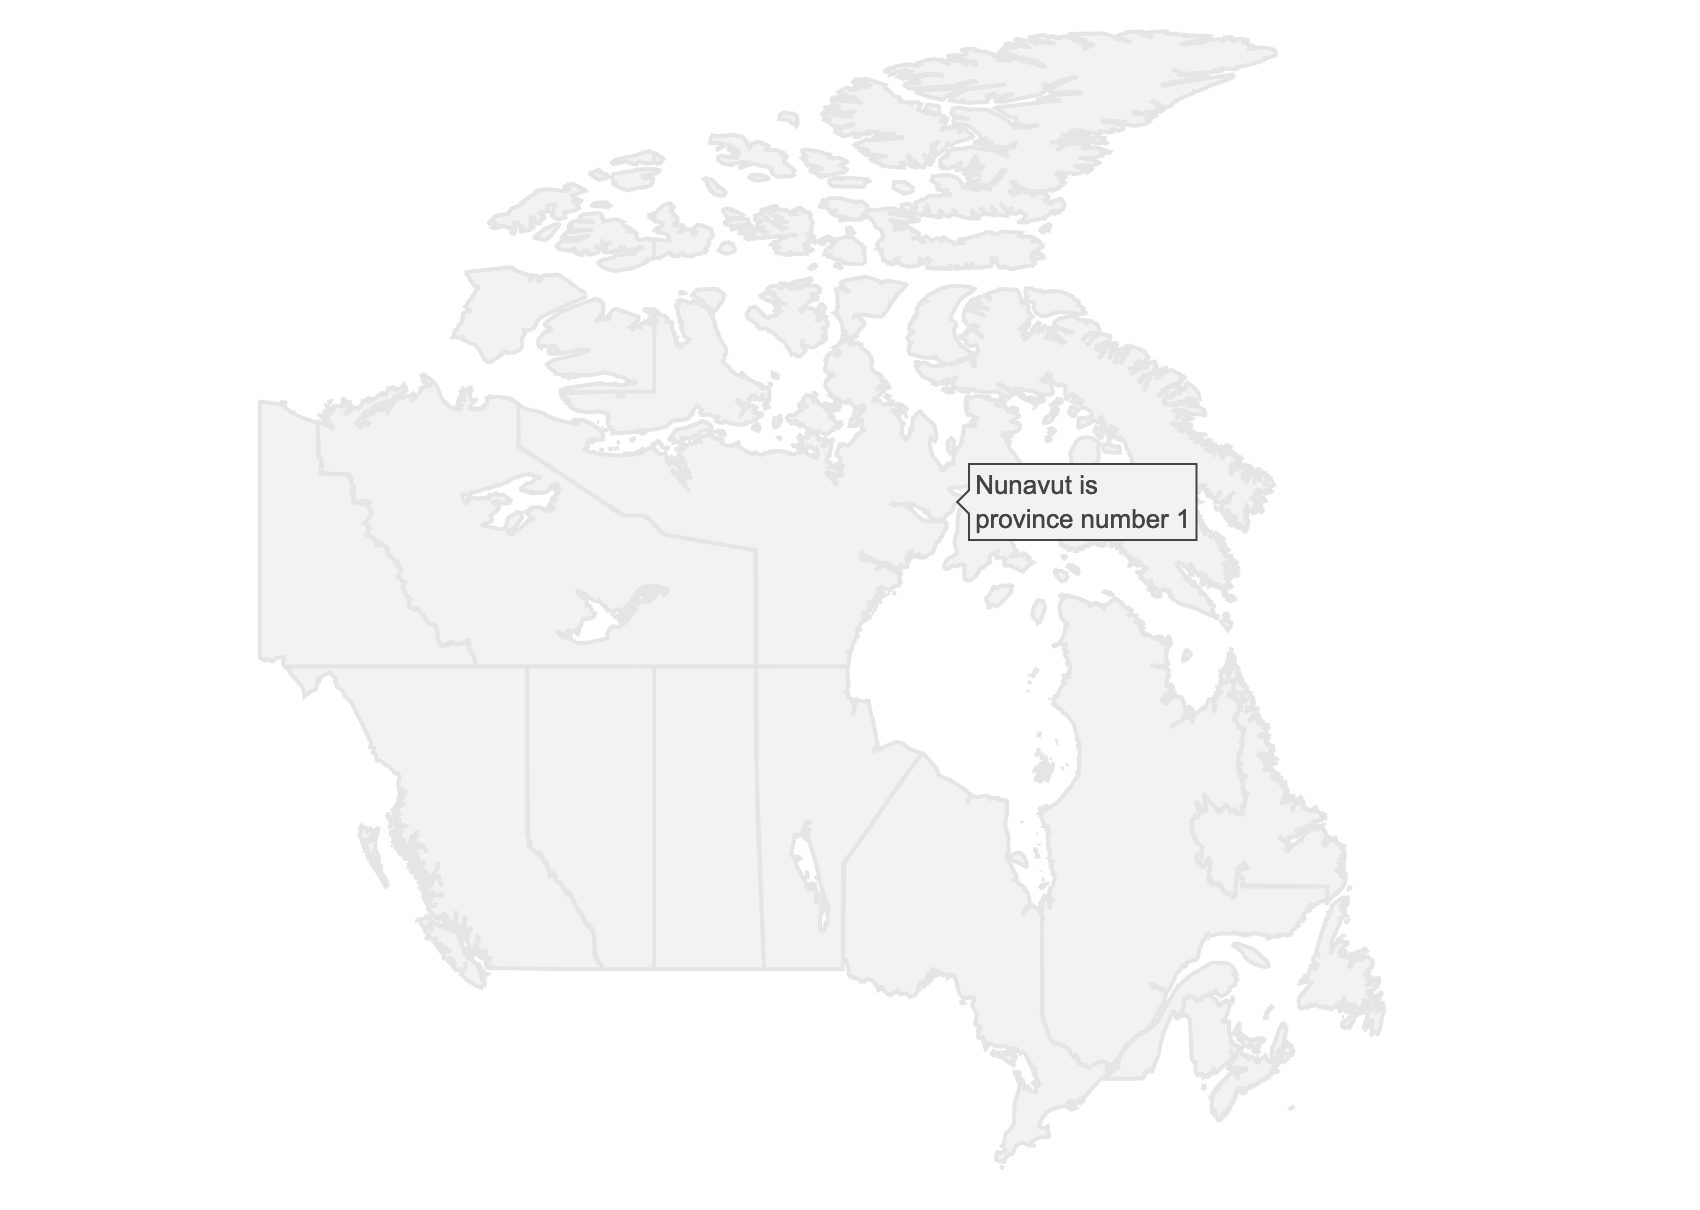 Using split, text, and hoveron='fills' to display a tooltip specific to each Canadian province.